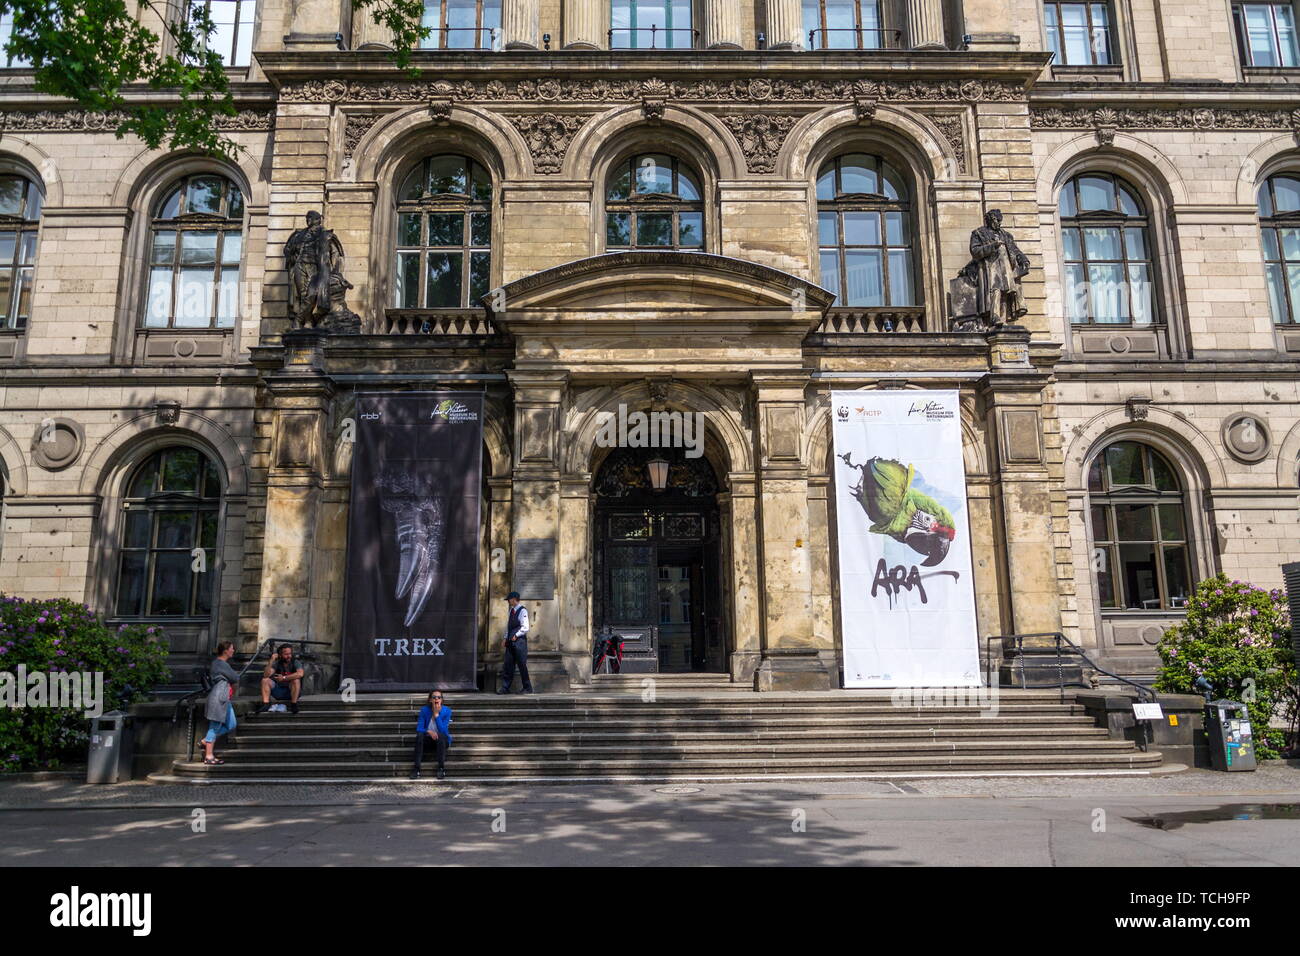 BERLIN, GERMANY - MAY 16 2018: People in front of Museum fur Naturkunde - Natural History Museum on May 16, 2018 in Berlin, Germany. Stock Photo